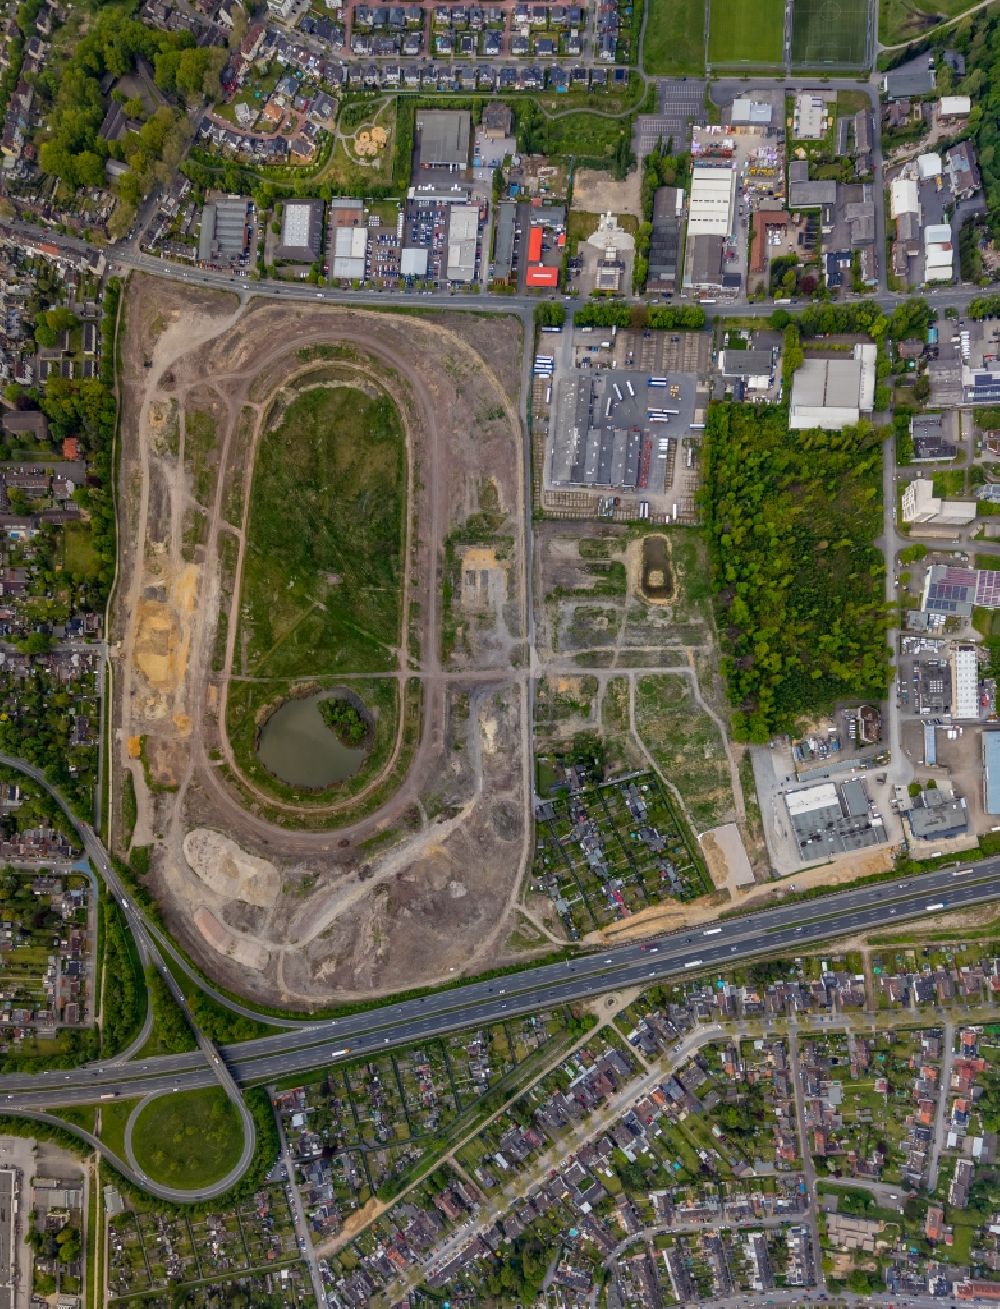 Aerial photograph Recklinghausen - Development, demolition and renovation work on the site of the former racing track - harness racing track as part of the integrated district development concept (ISEK) Hillerheide in Recklinghausen at Ruhrgebiet in the state of North Rhine-Westphalia, Germany